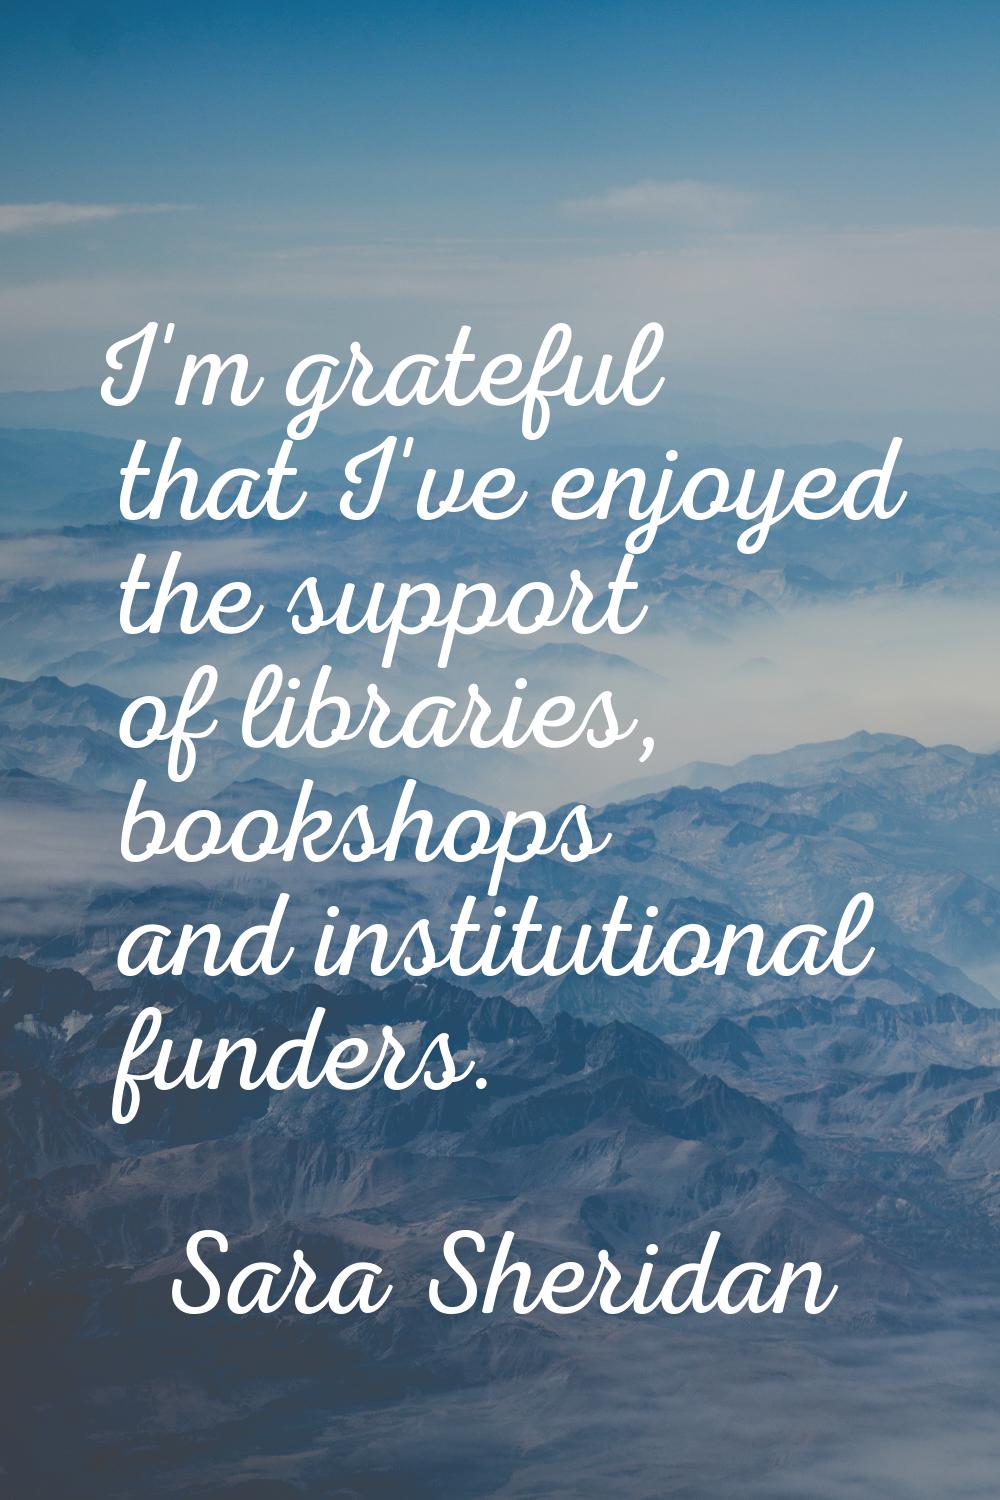 I'm grateful that I've enjoyed the support of libraries, bookshops and institutional funders.